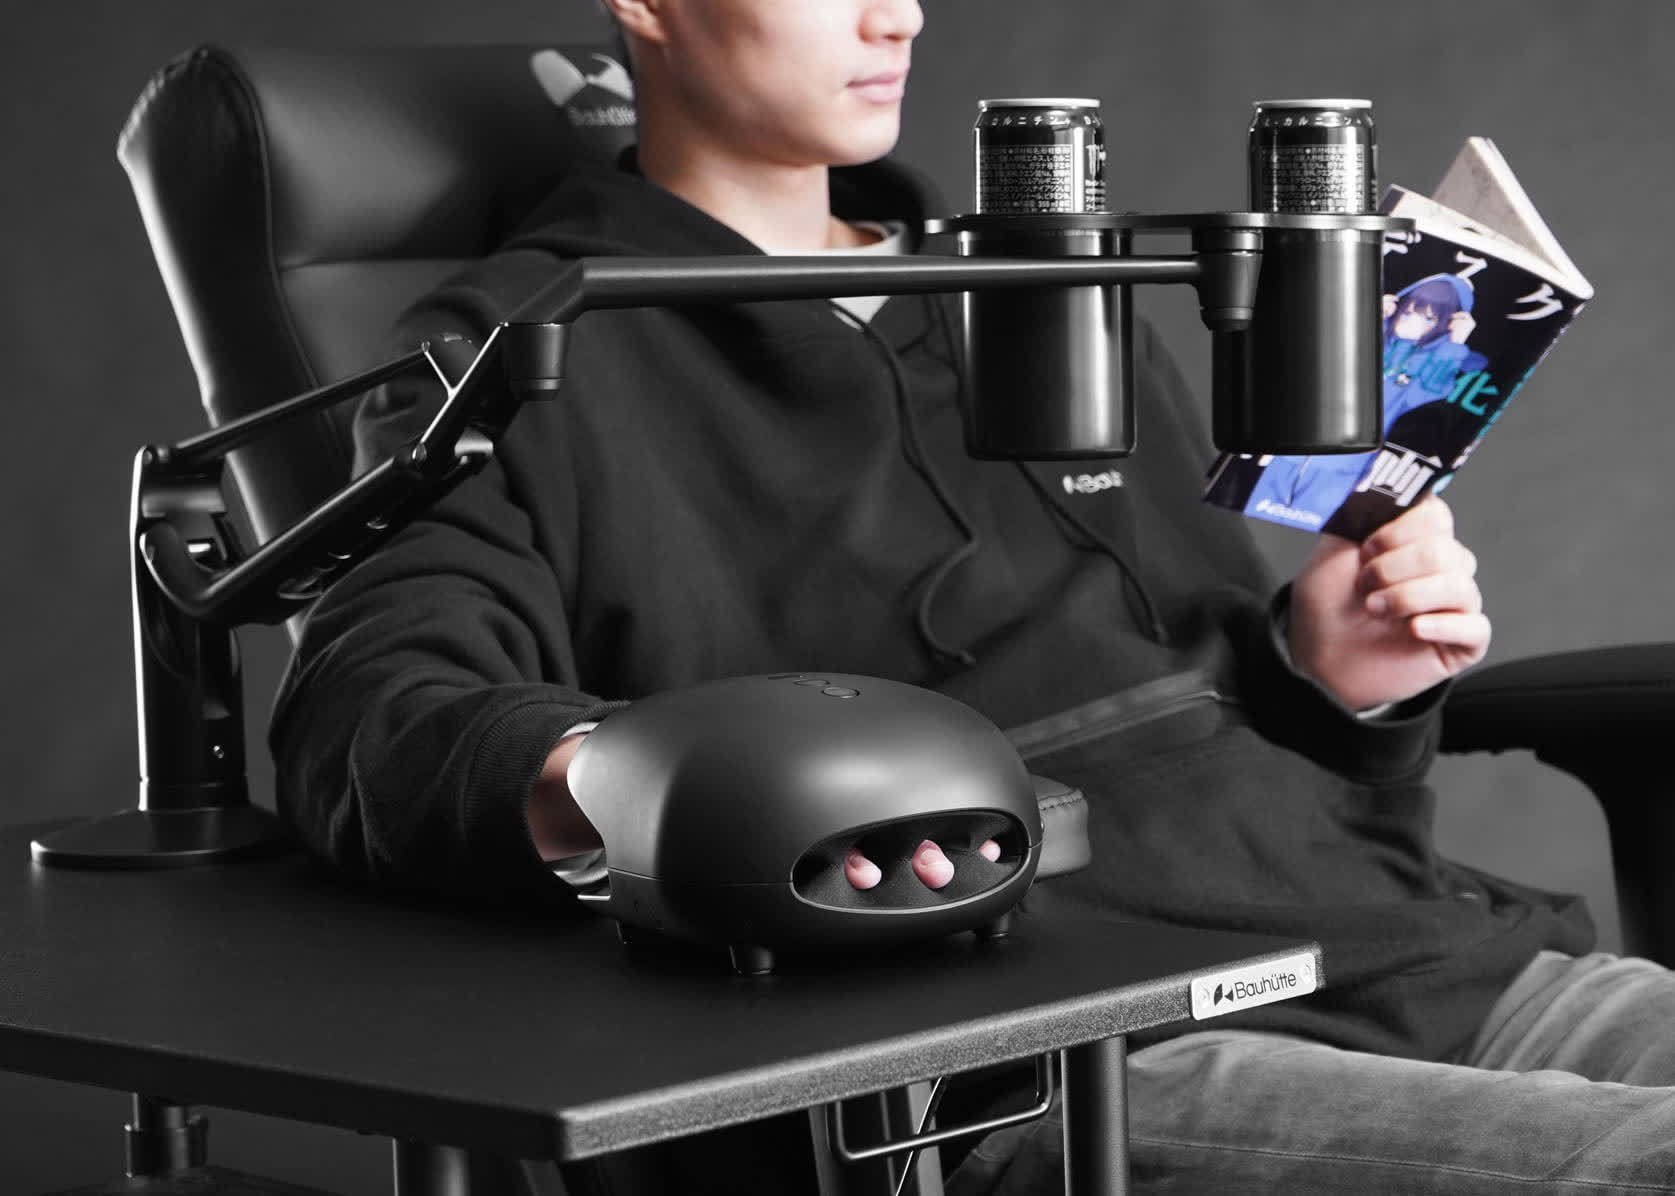 Japanese gaming company's newest product aims to reduce esports injuries